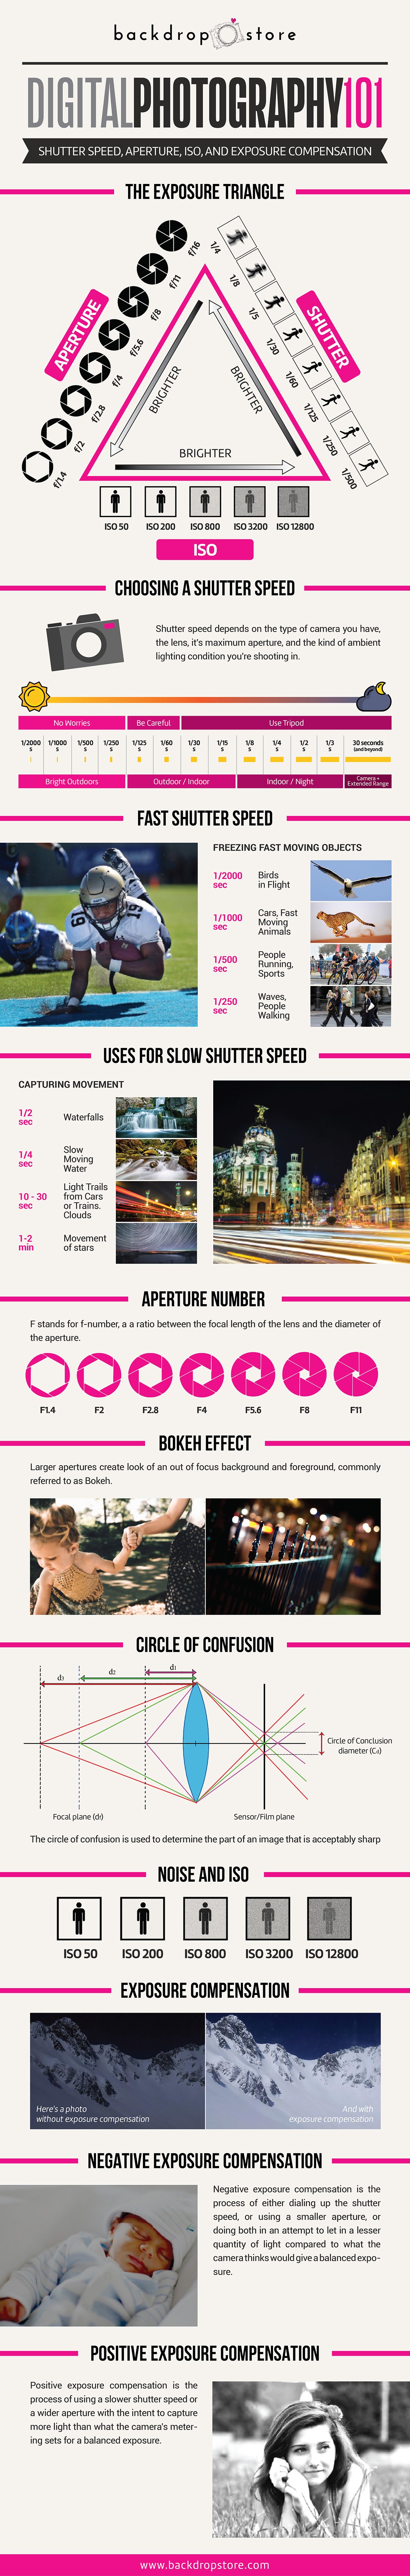 Digital Photography 101 #Infographic